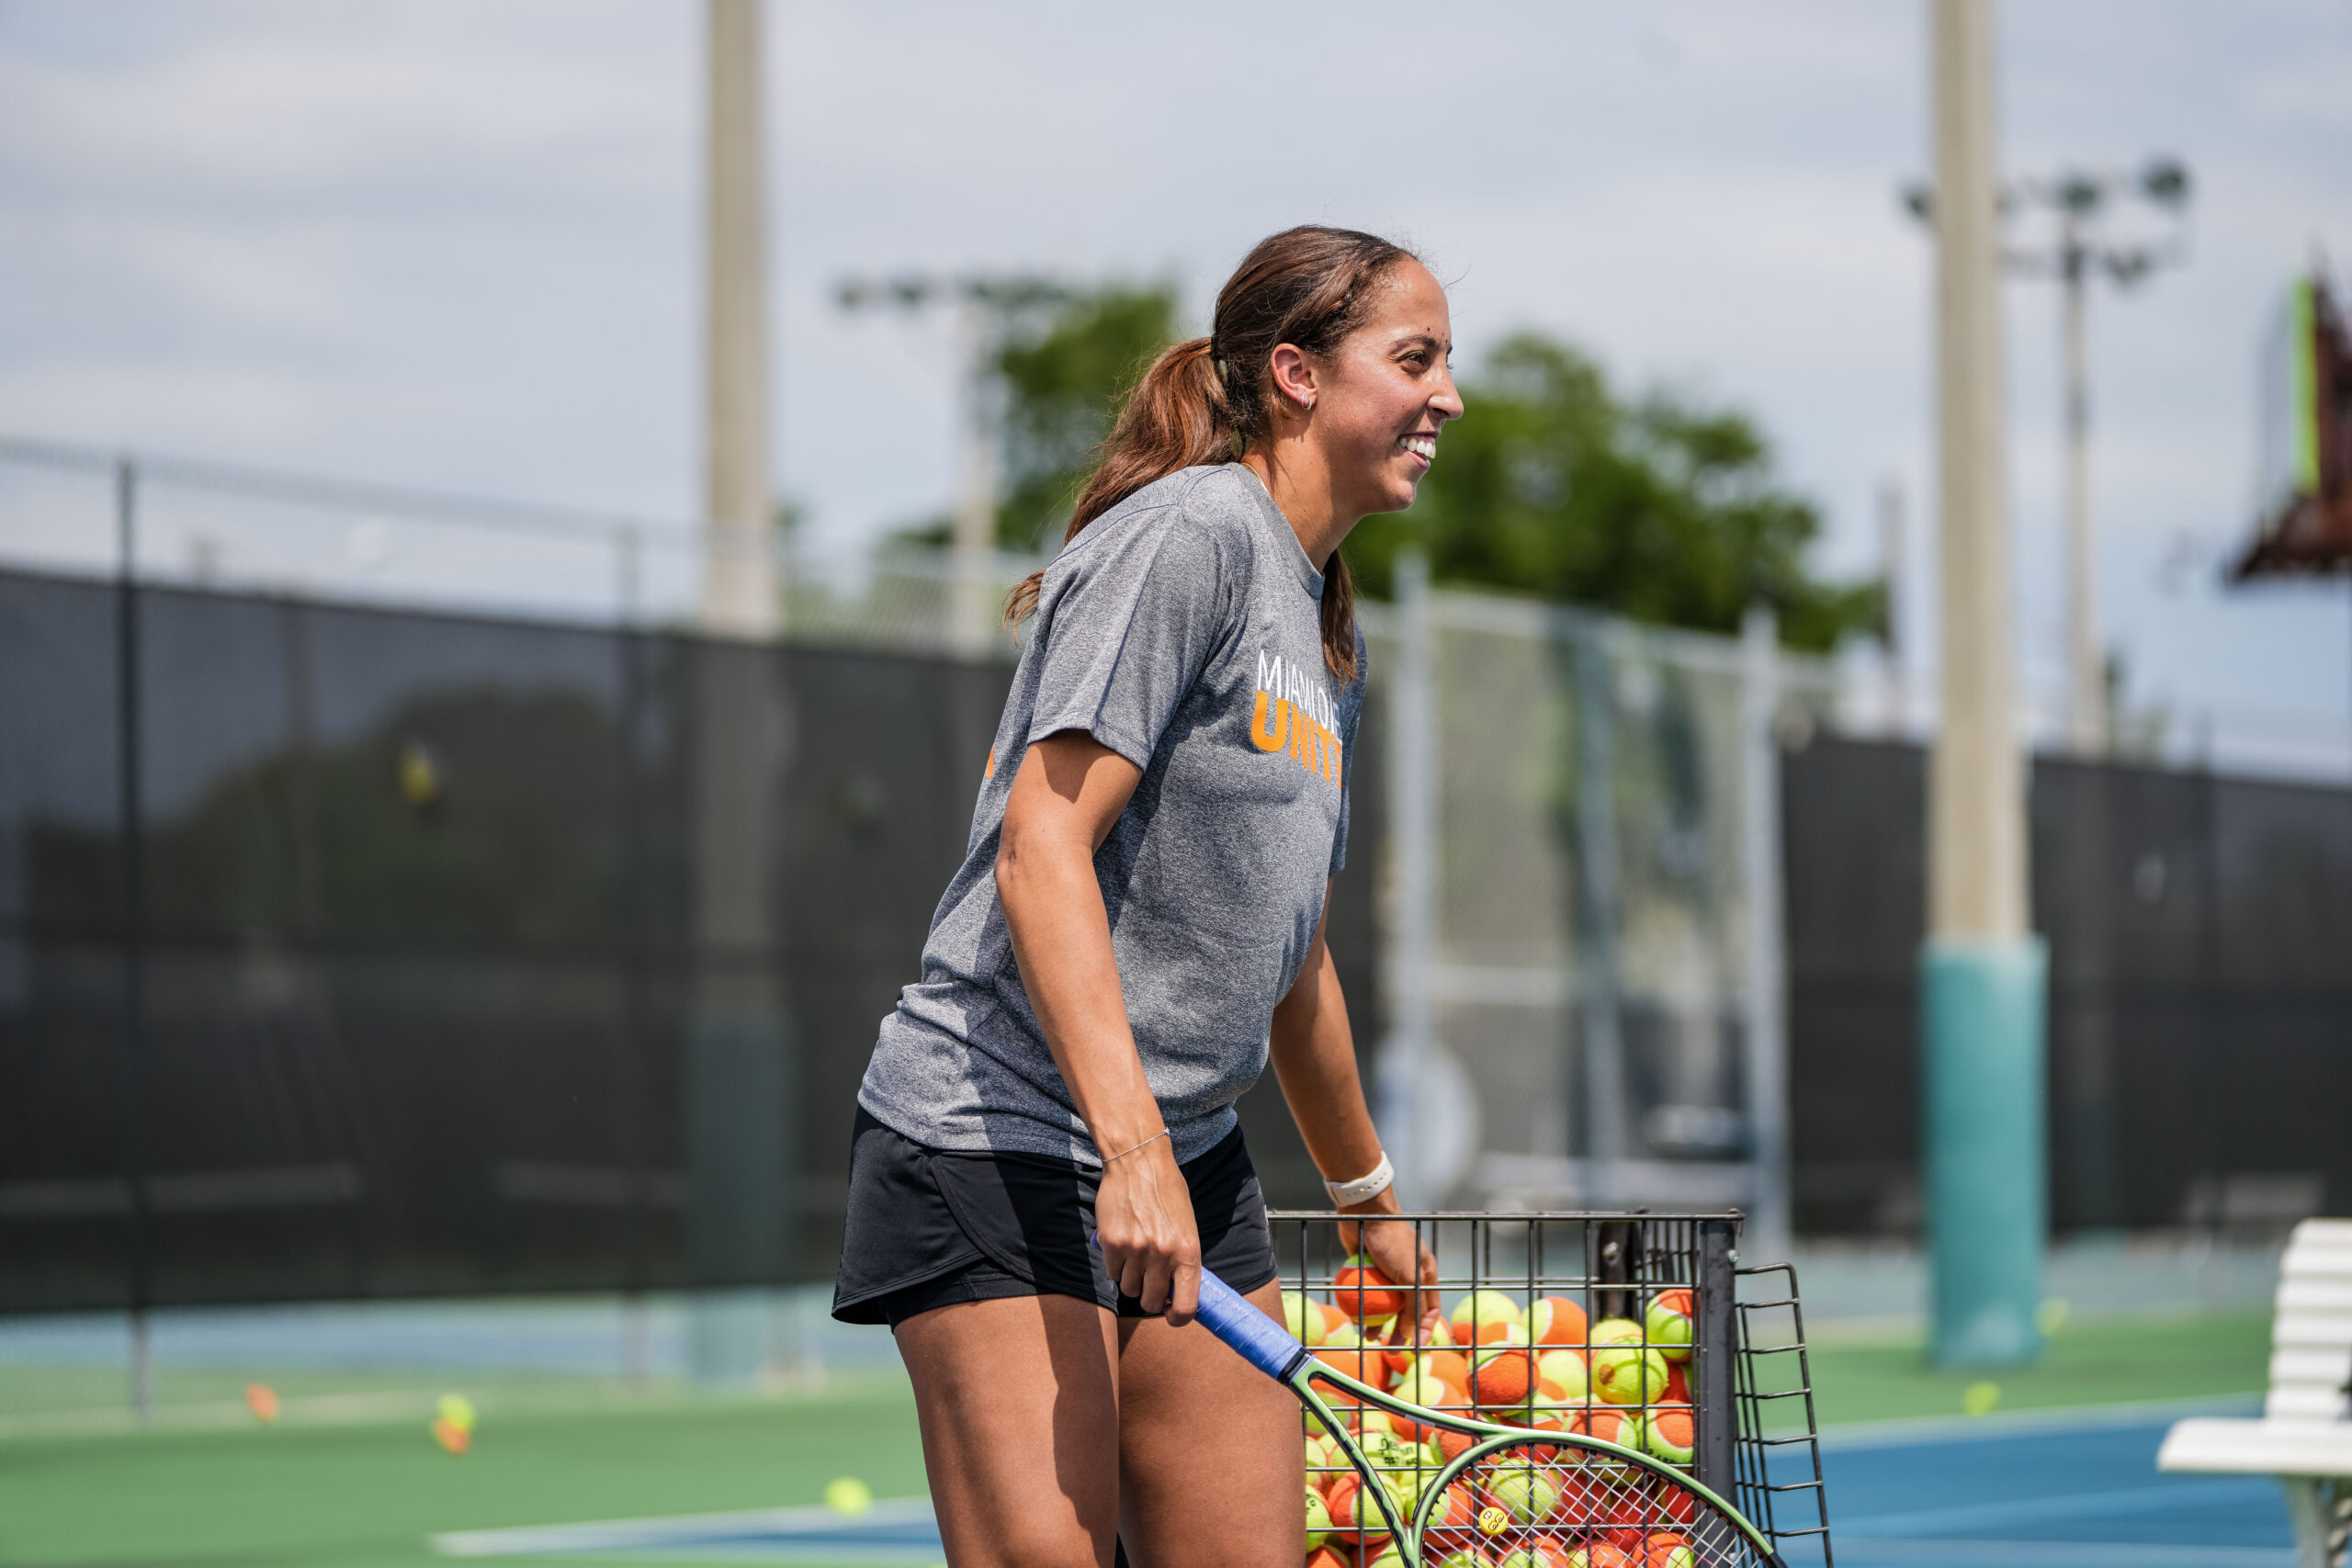 Madison Keys looks on during the on-court clinic at the Big Brothers, Big Sisters event at Moore Park in Miami on March 20, 2023.